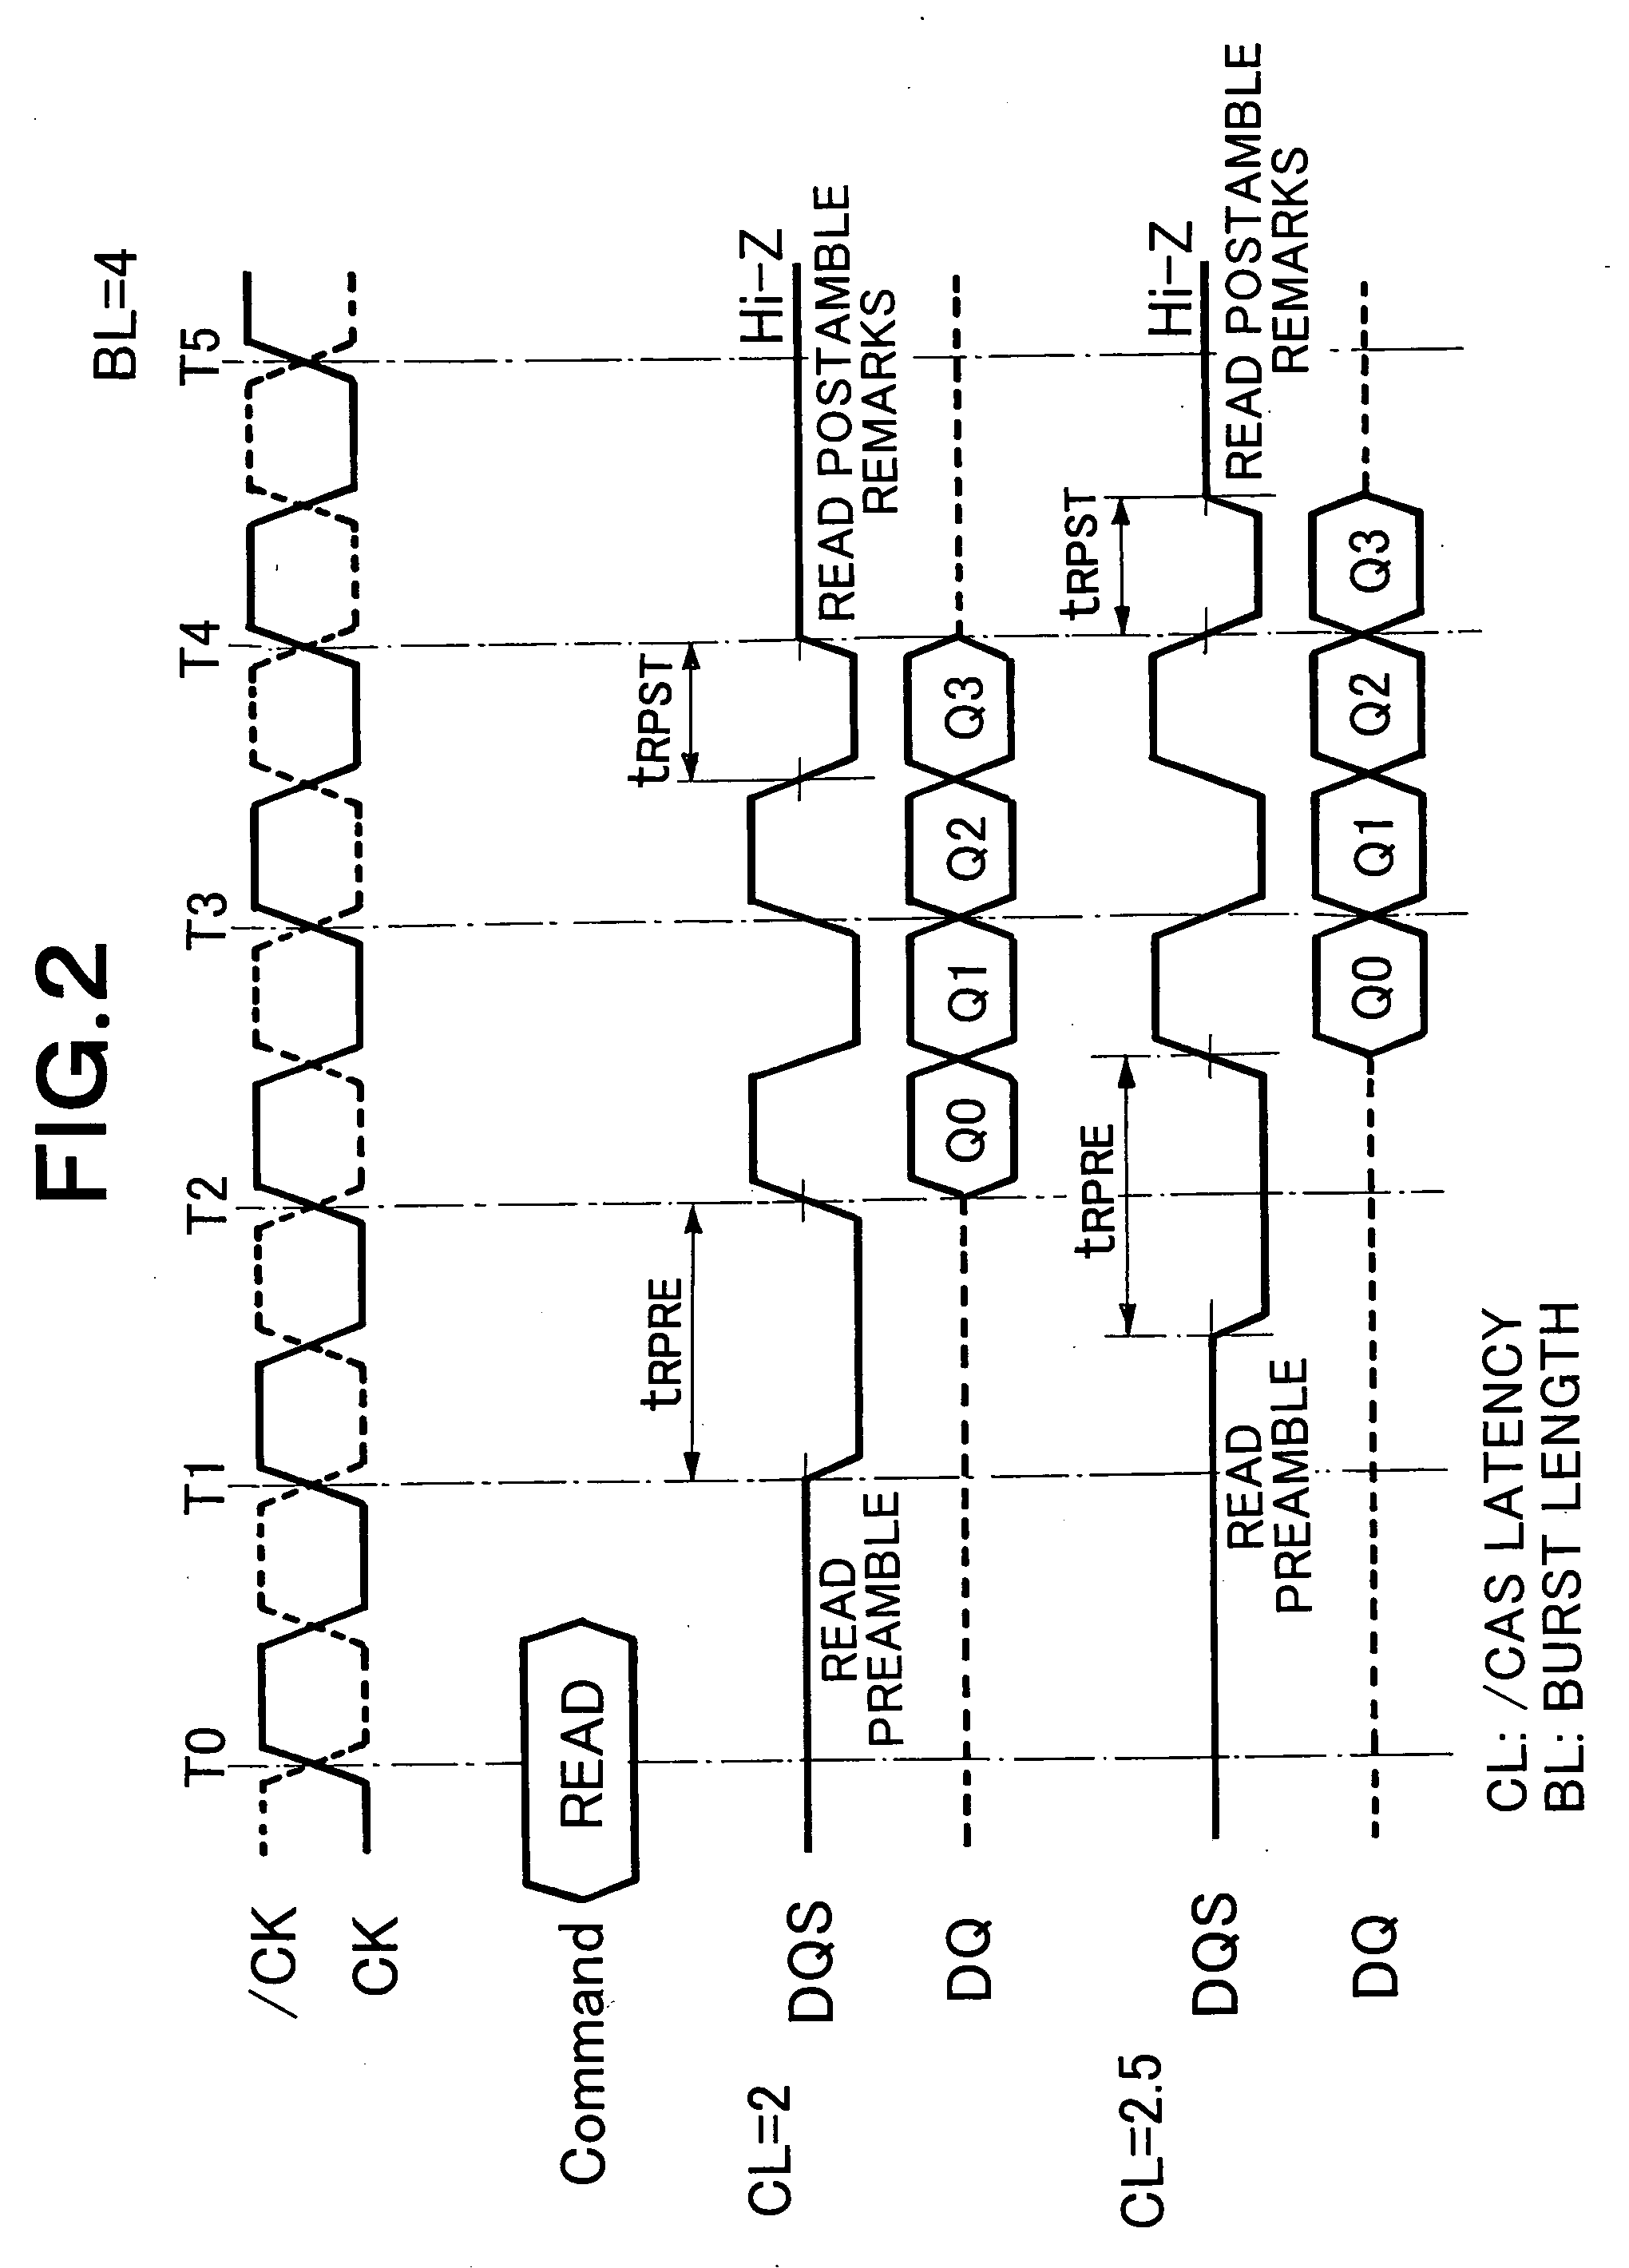 Memory interface control circuit and memory interface control method